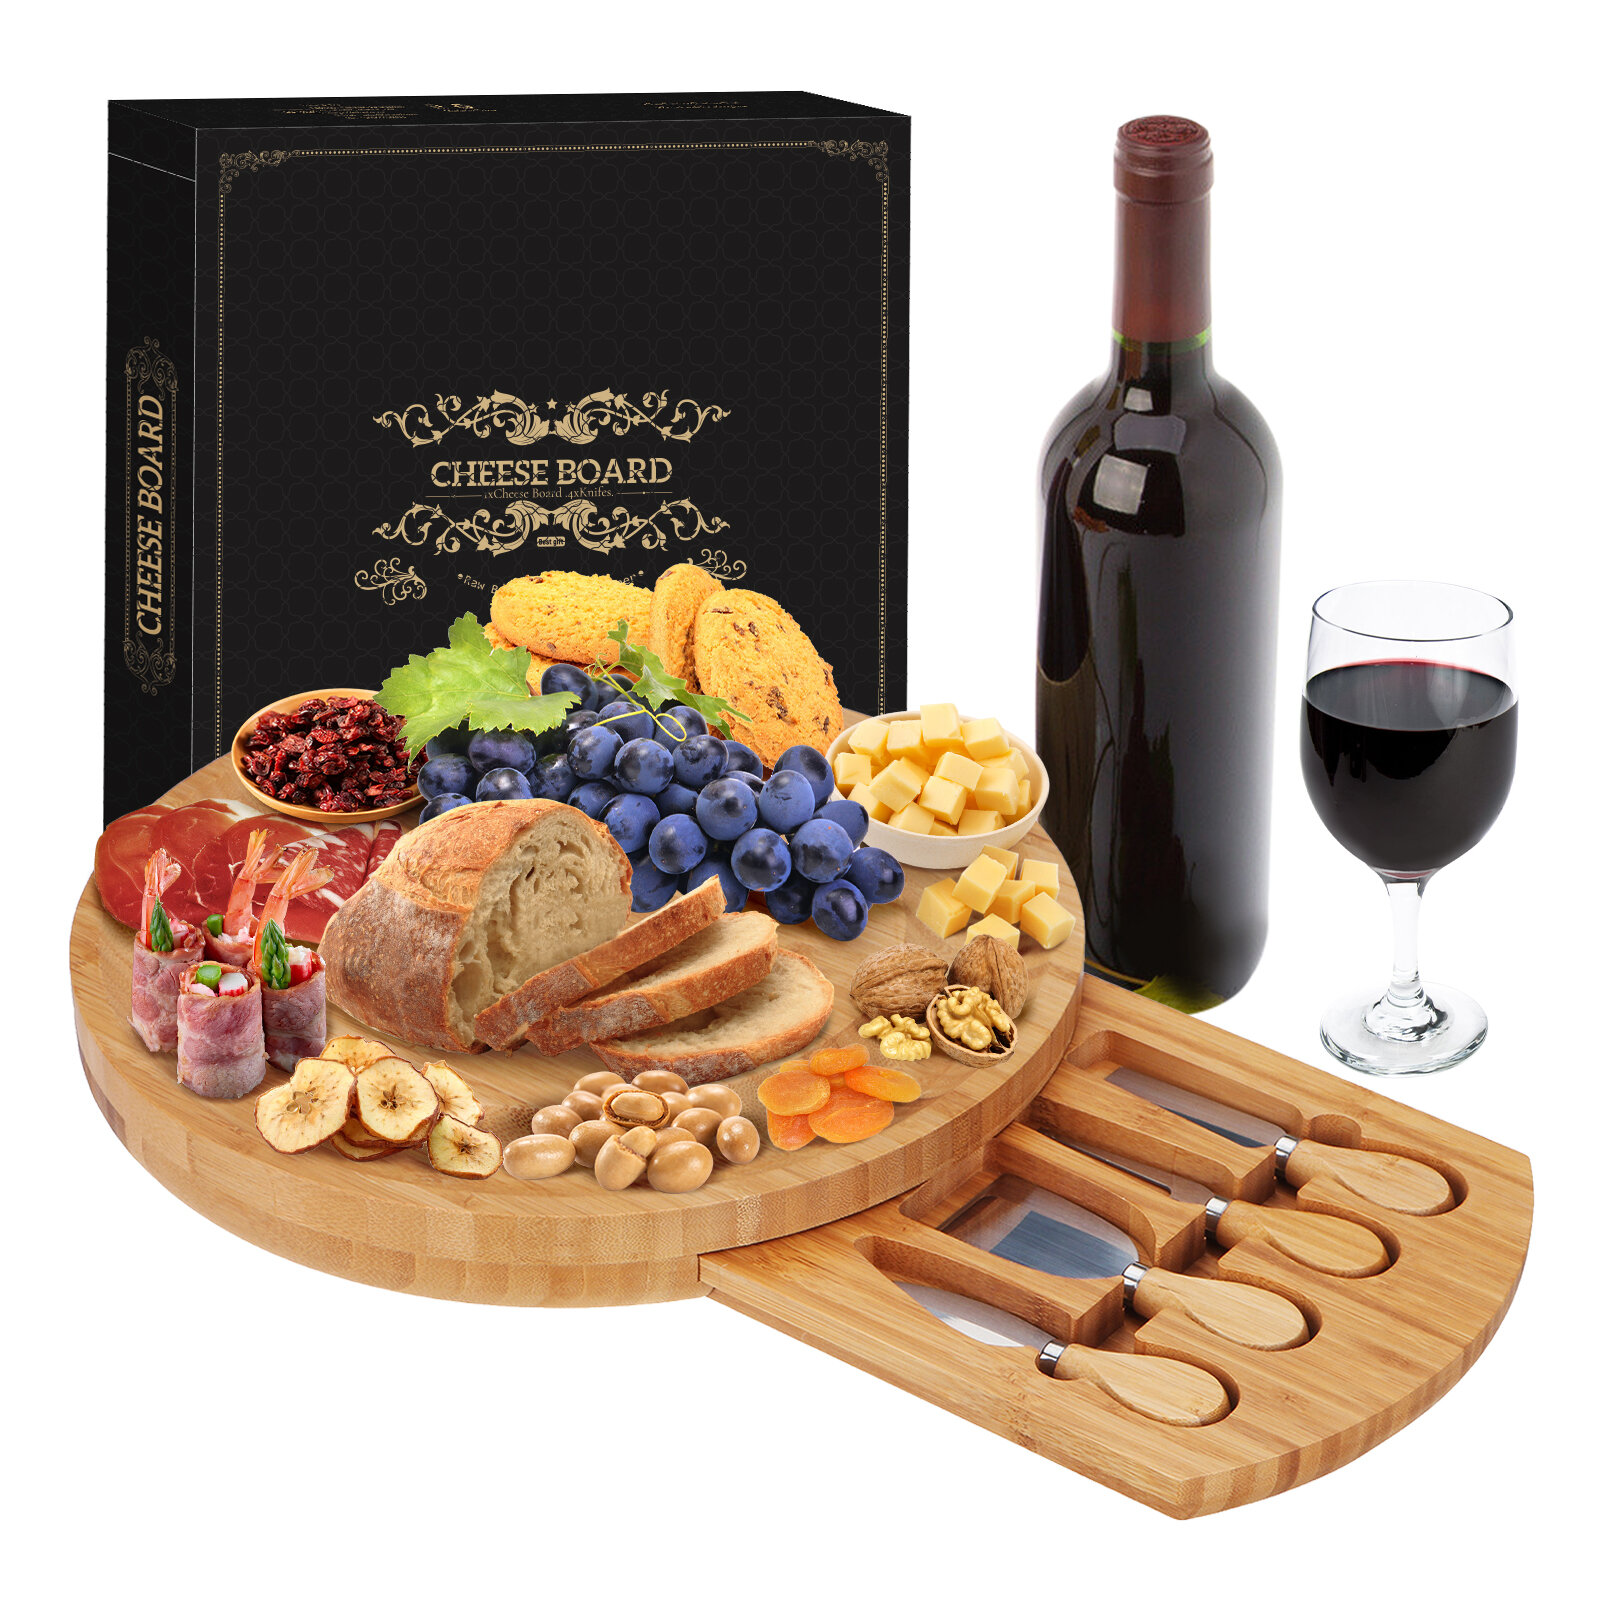 Cheese Cutting Board and Cheese Serving Platter Bamboo Tray and Knife Set Included 4 Steel Knife Fou